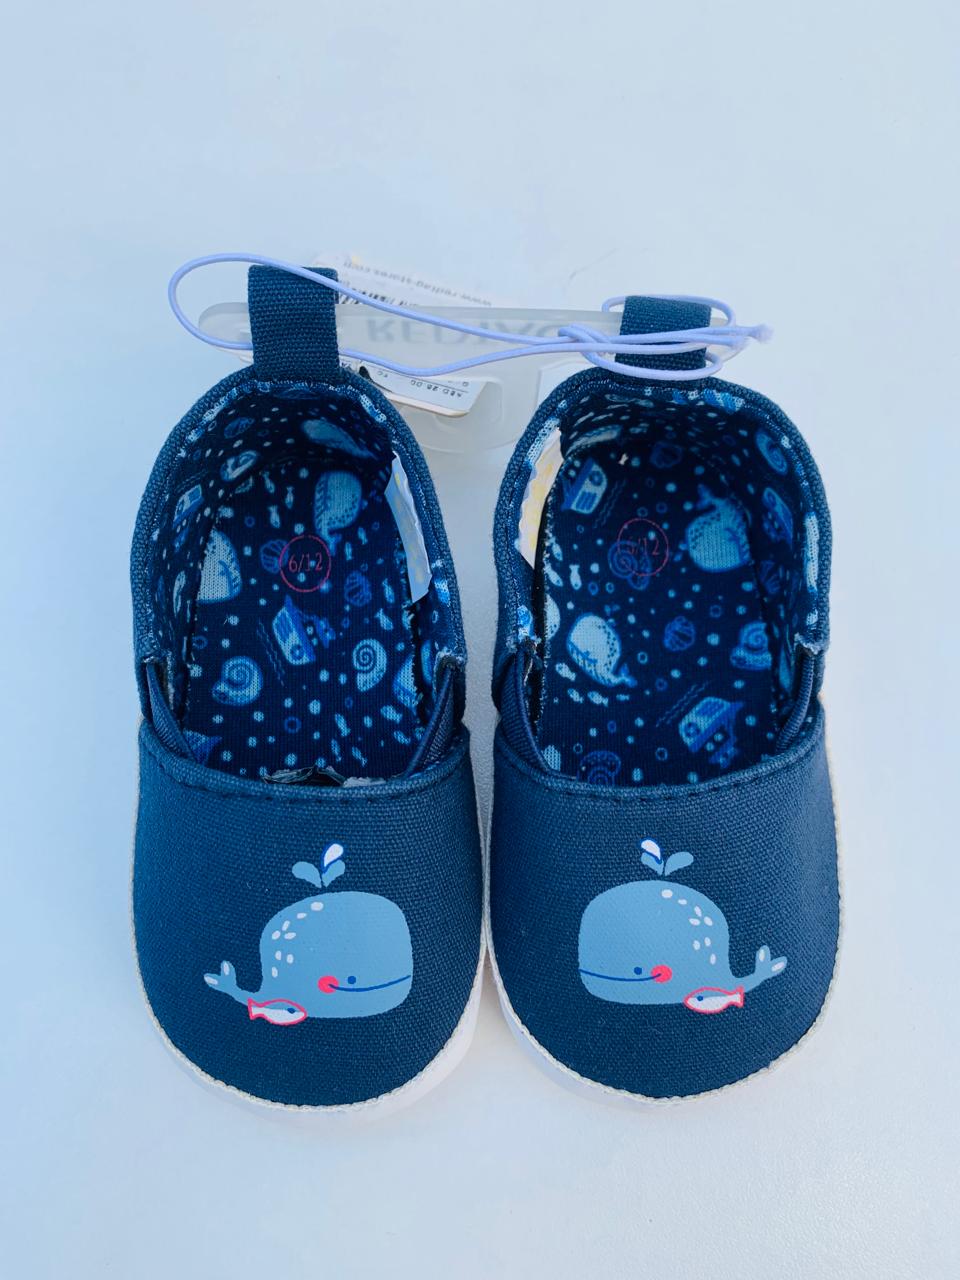 REDTAG Whale Theme Shoes